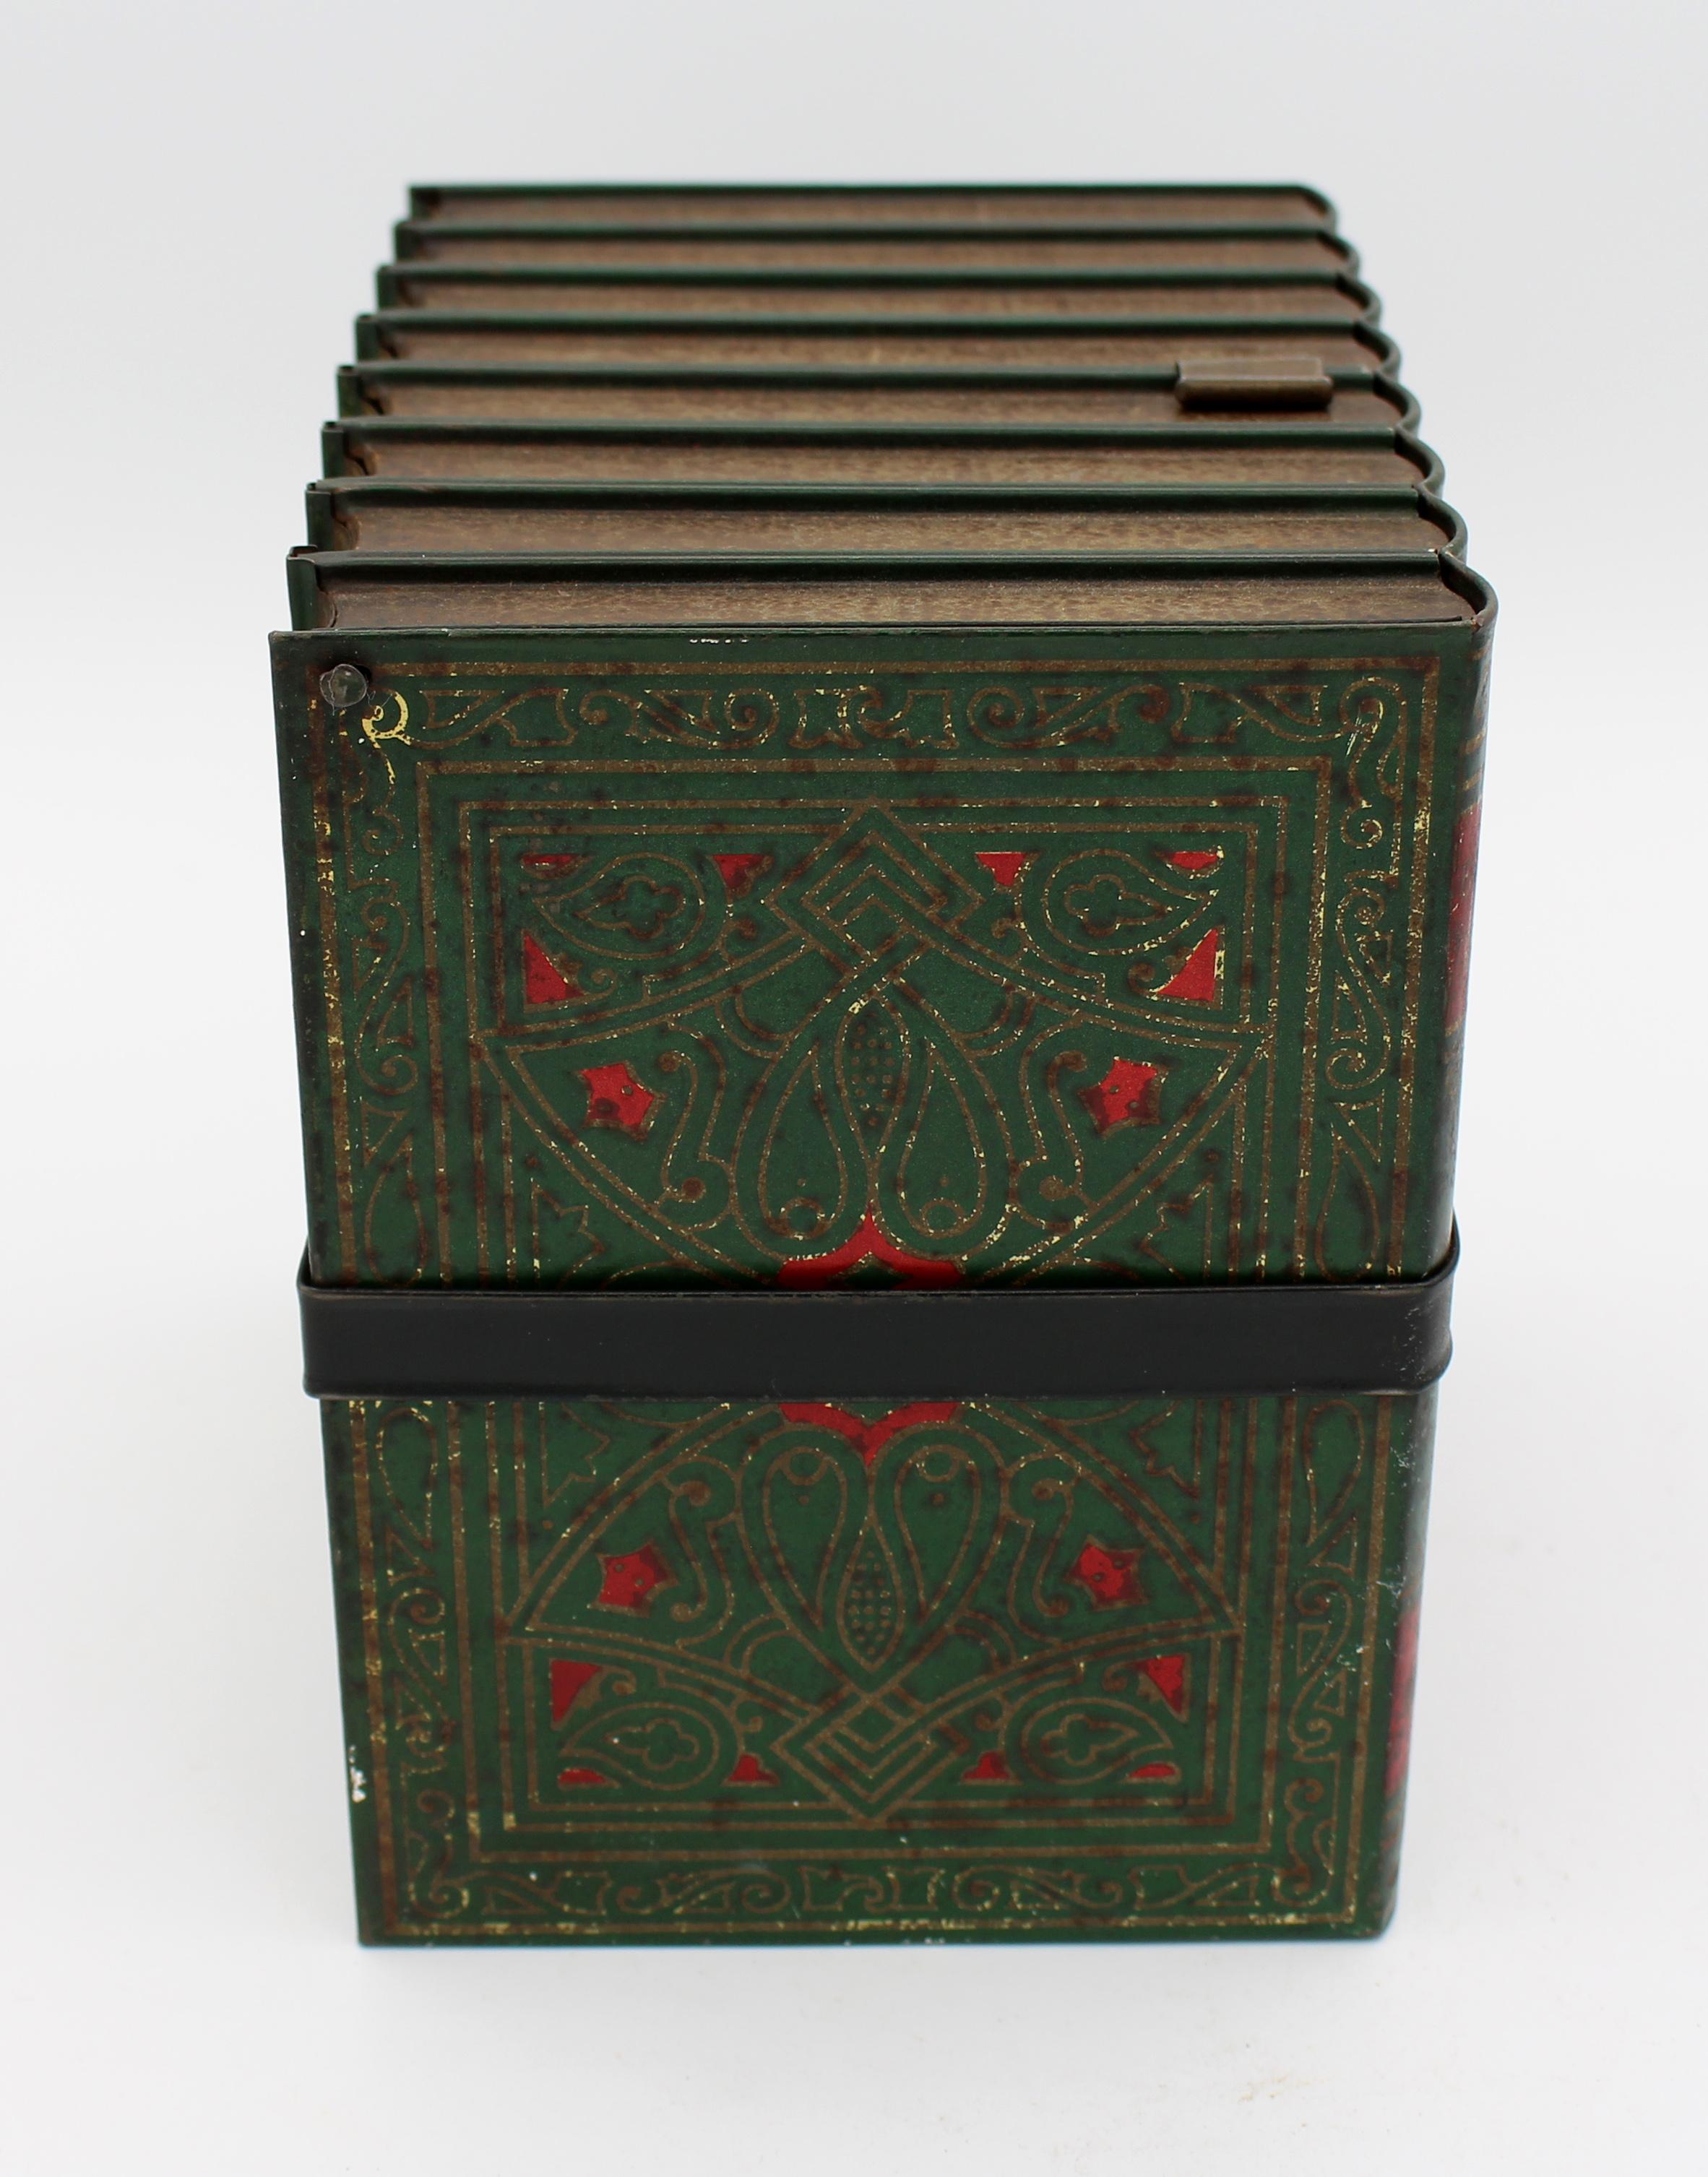 Faux books biscuit tin box by Huntley & Palmers, 1911, English. In the form of a strapped group of novels by Charles Dickens in old green & red paint with gilt work and black strap. Overall wear commensurate with age & use.
6.5